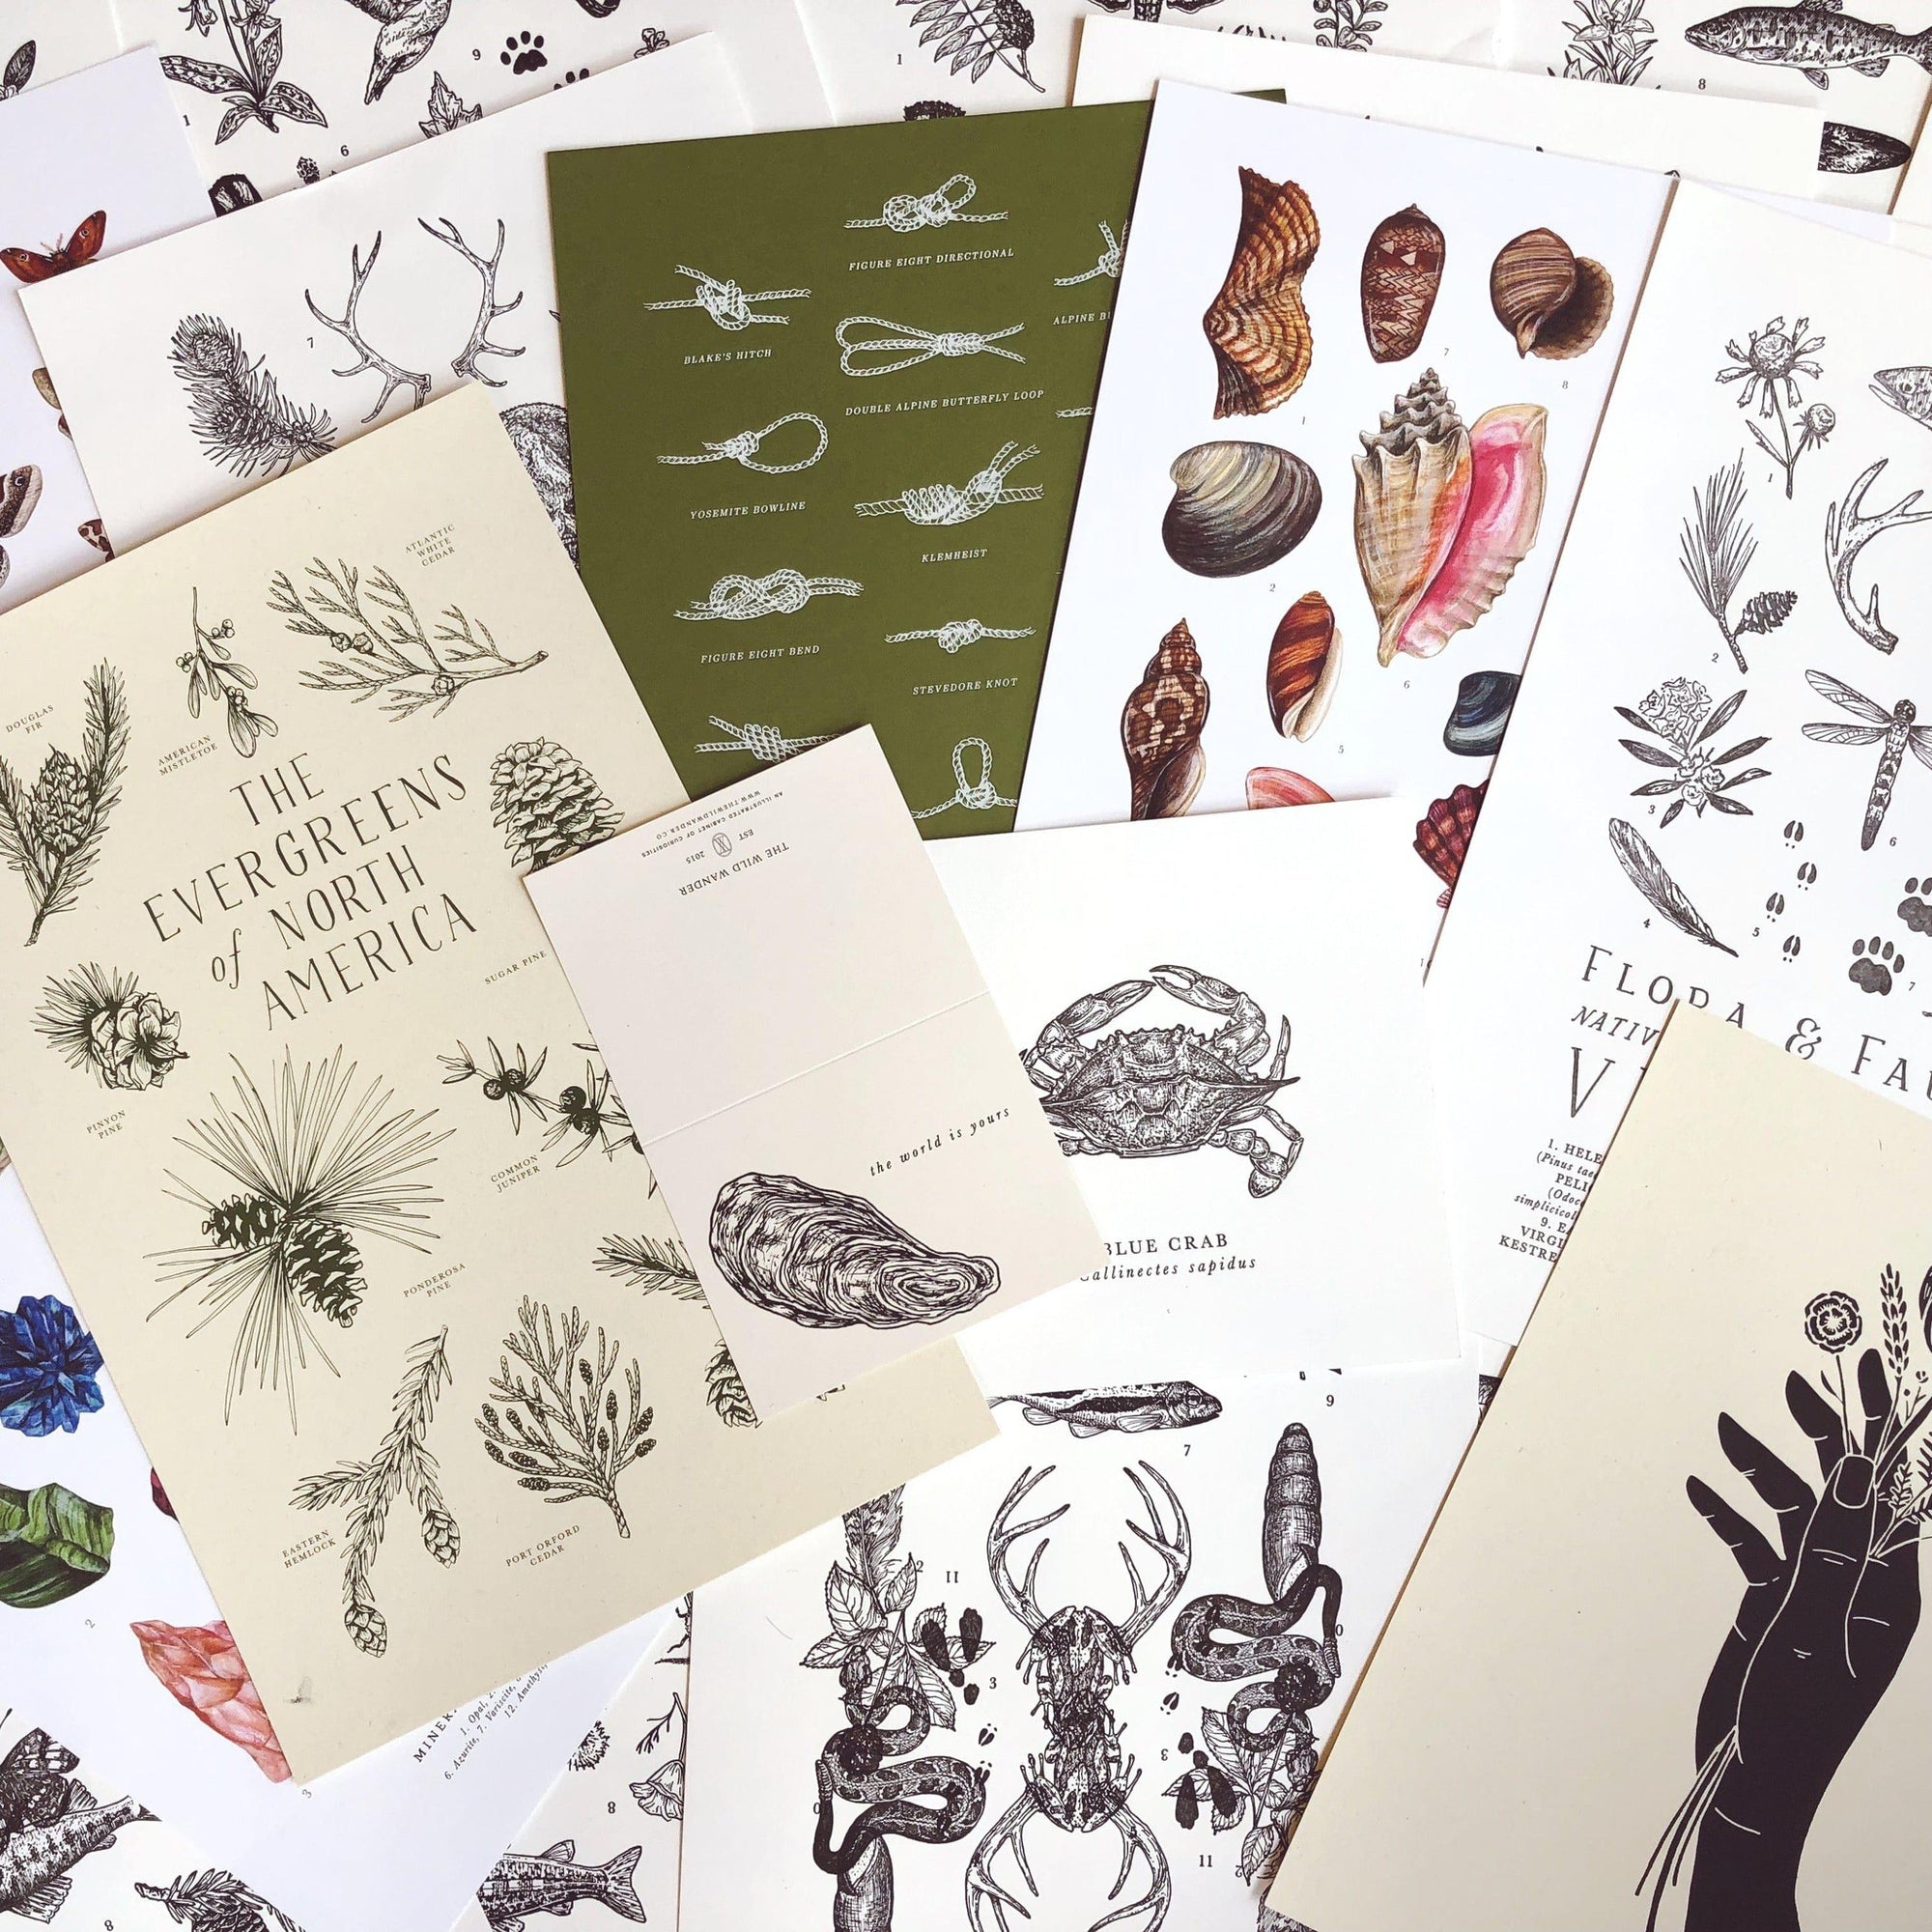 A collection of Mystery Stack cards with various images of plants and animals from The Wild Wander brand.